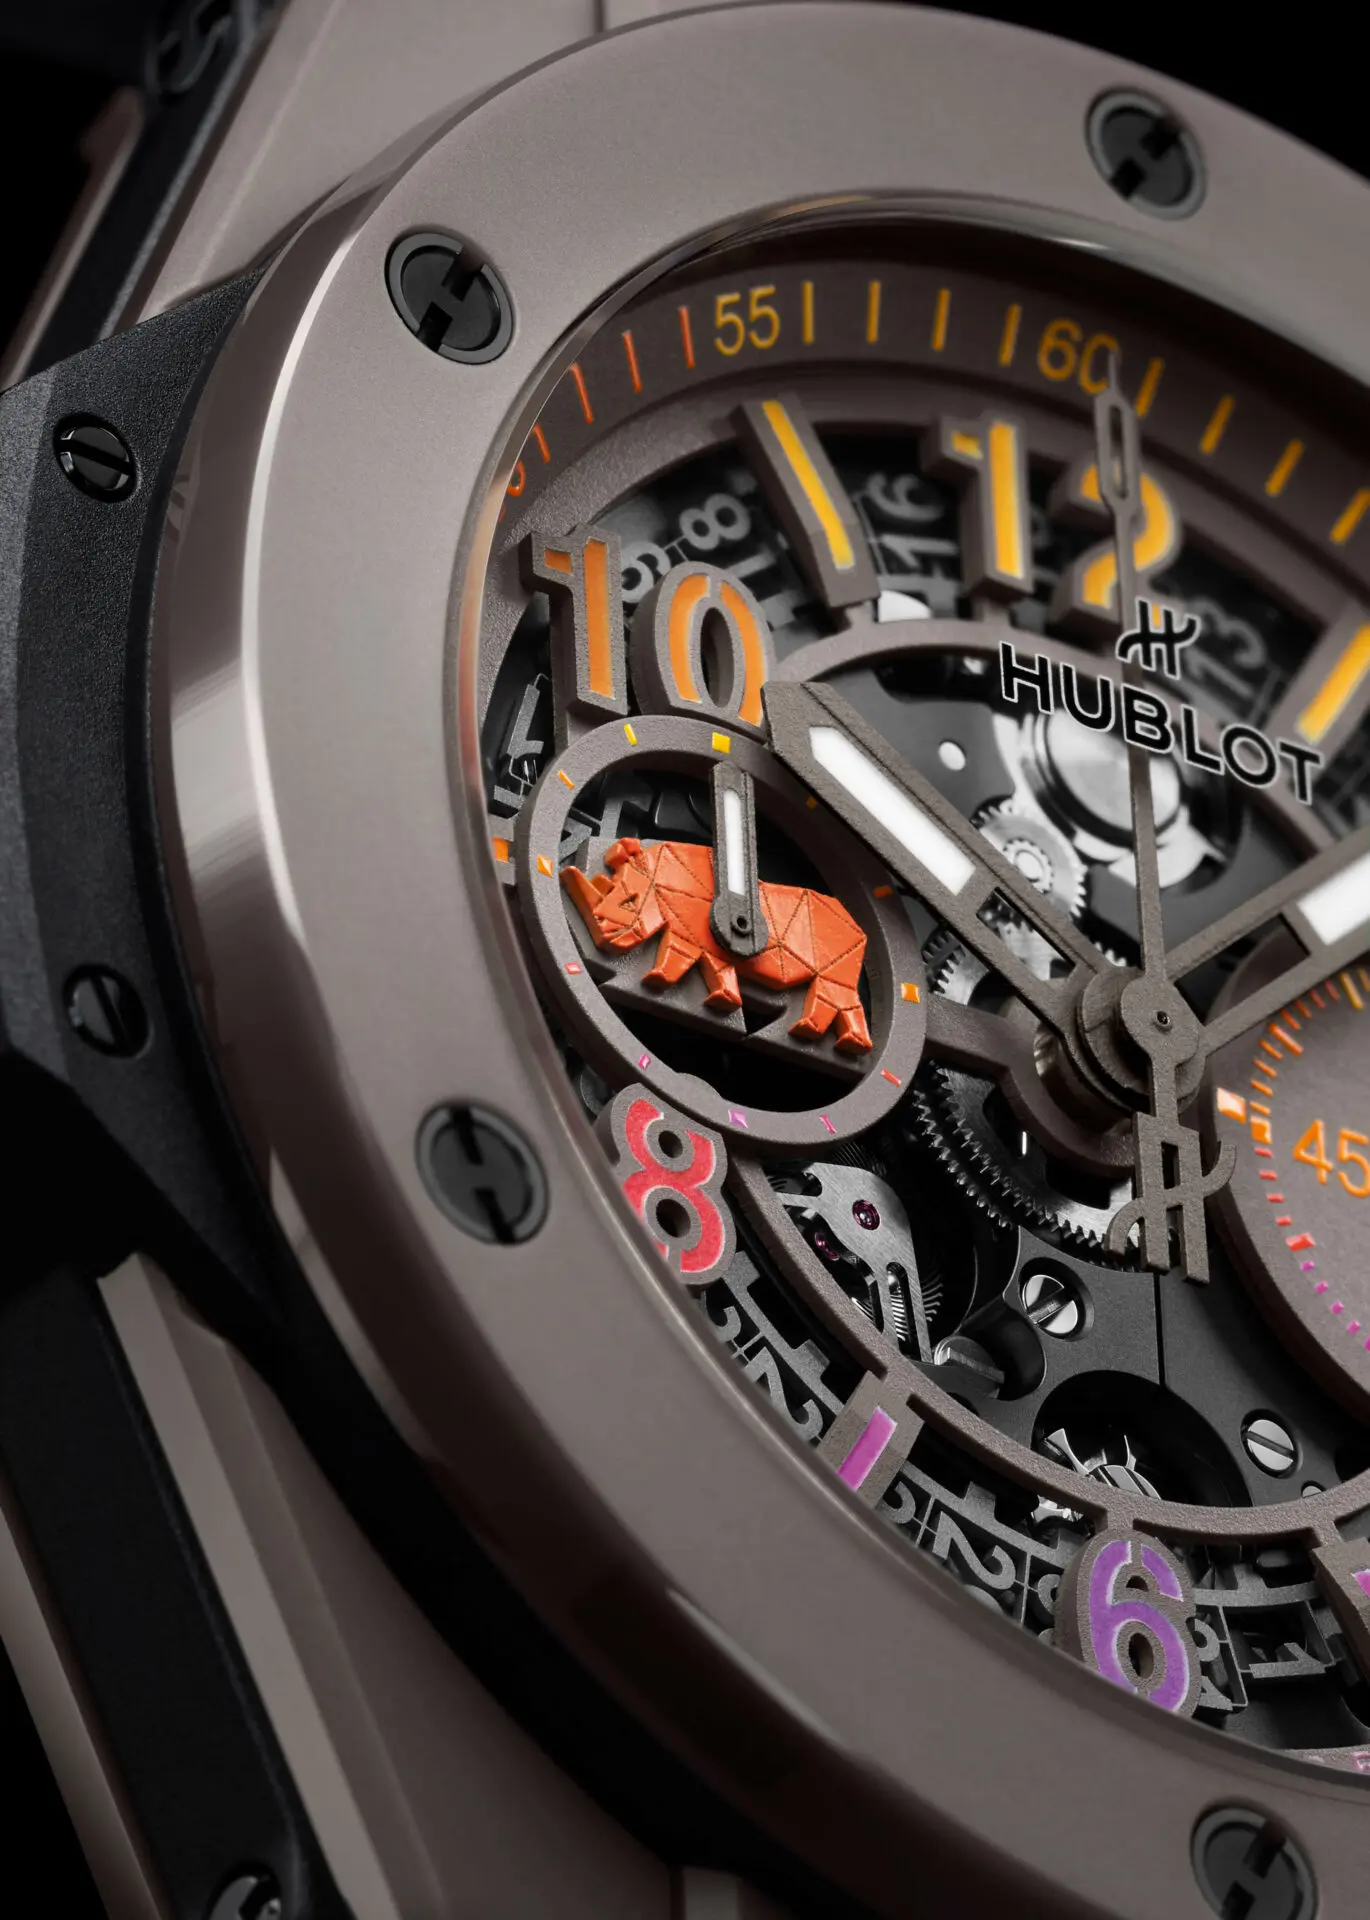 The new Hublot 2023 watches at the LVMH Watch Week